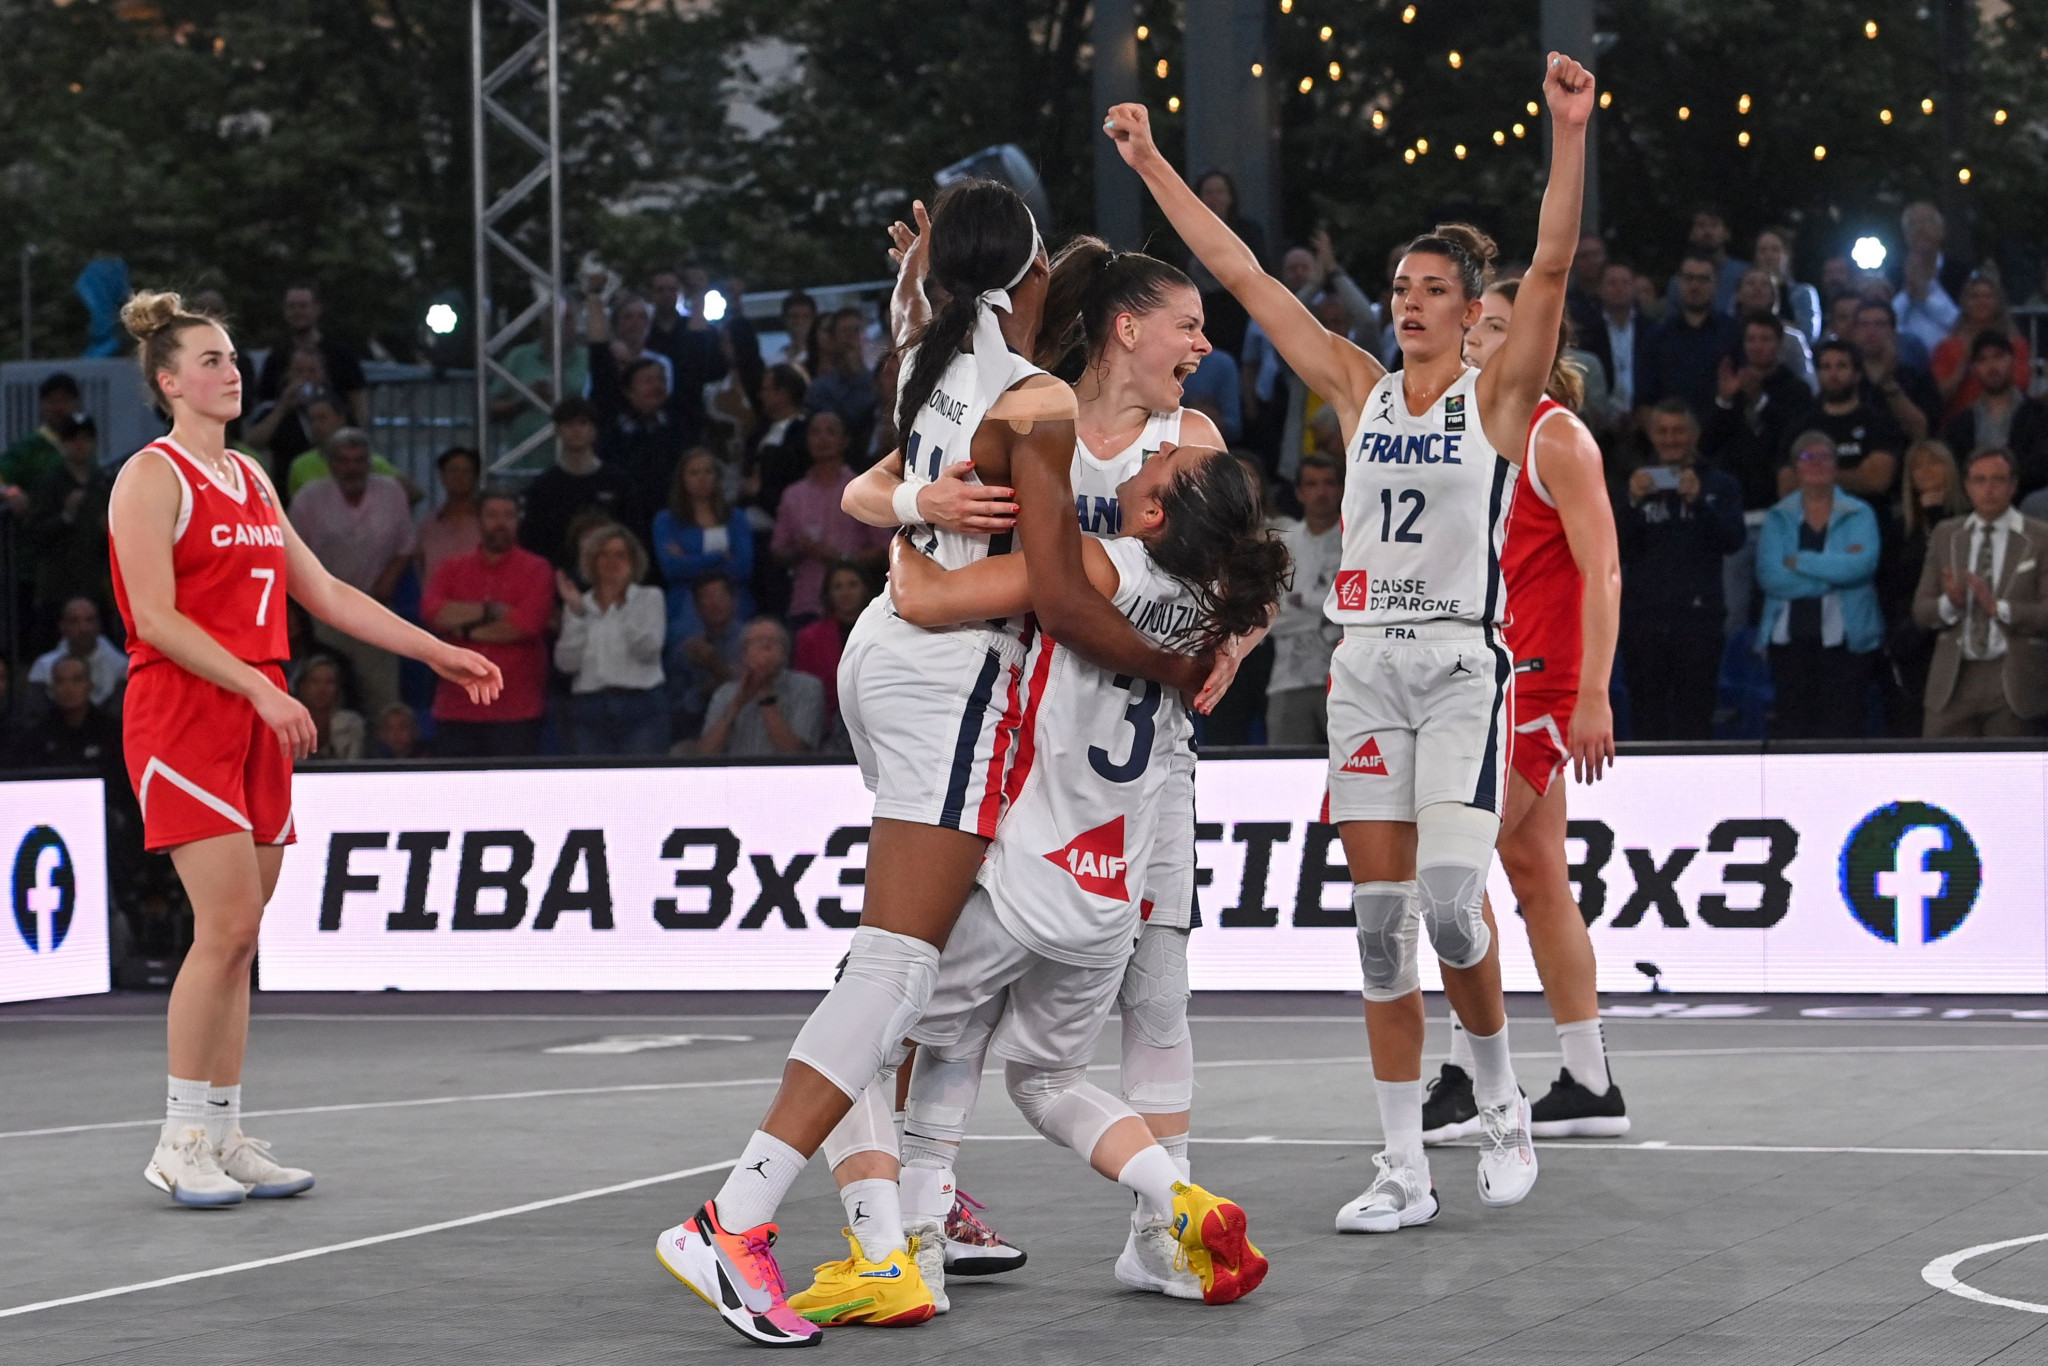 Four teams unbeaten after opening day of action at FIBA 3x3 Europe Cup